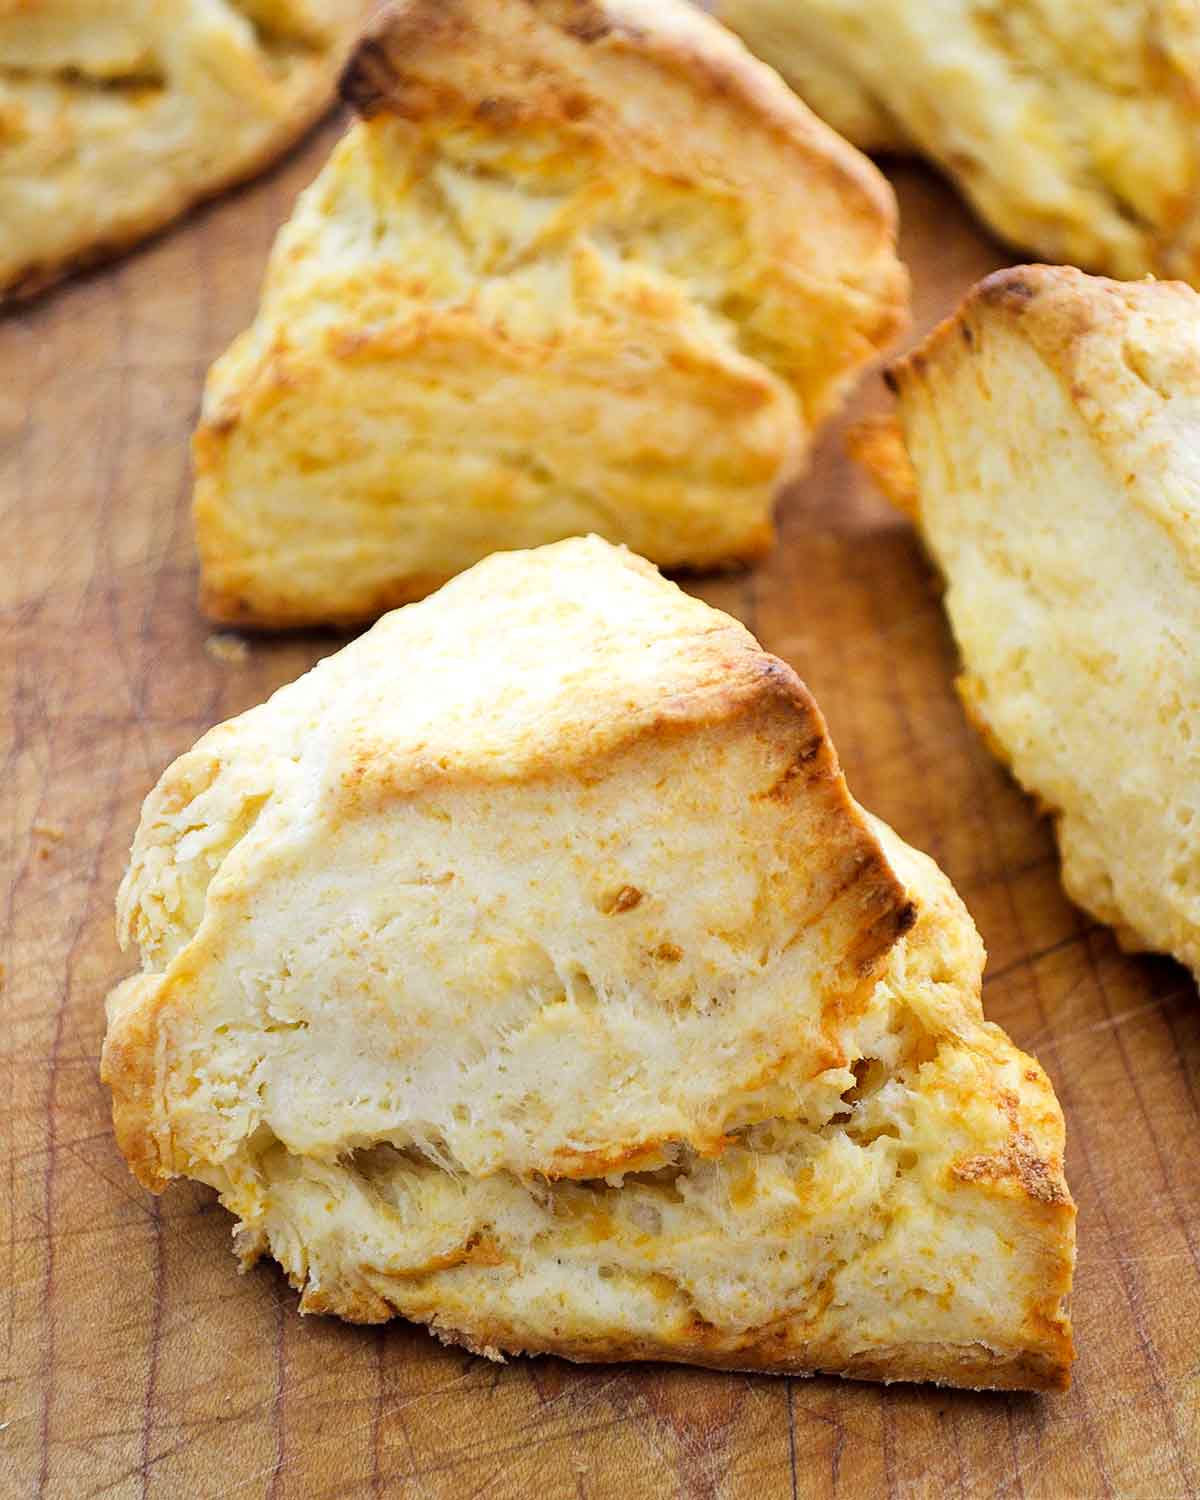 Five irregularly shaped cheddar biscuits with gold edges, on a wooden cutting board.